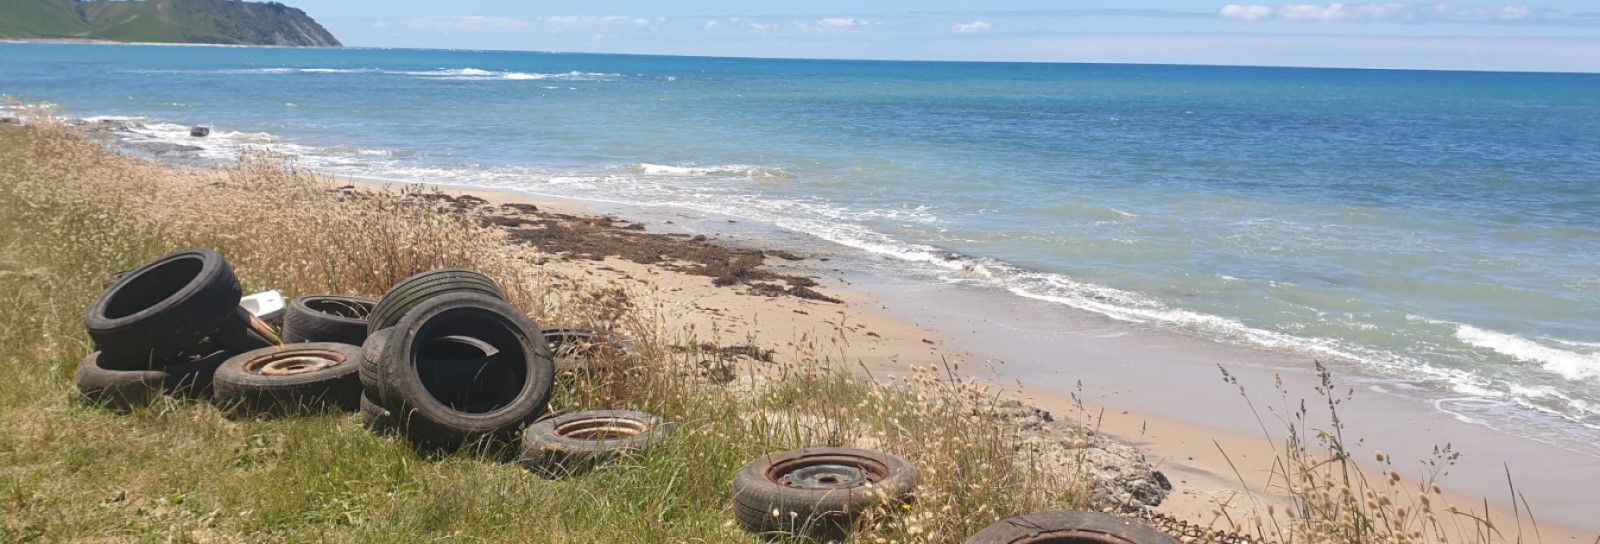 Tyres on the beach banner image